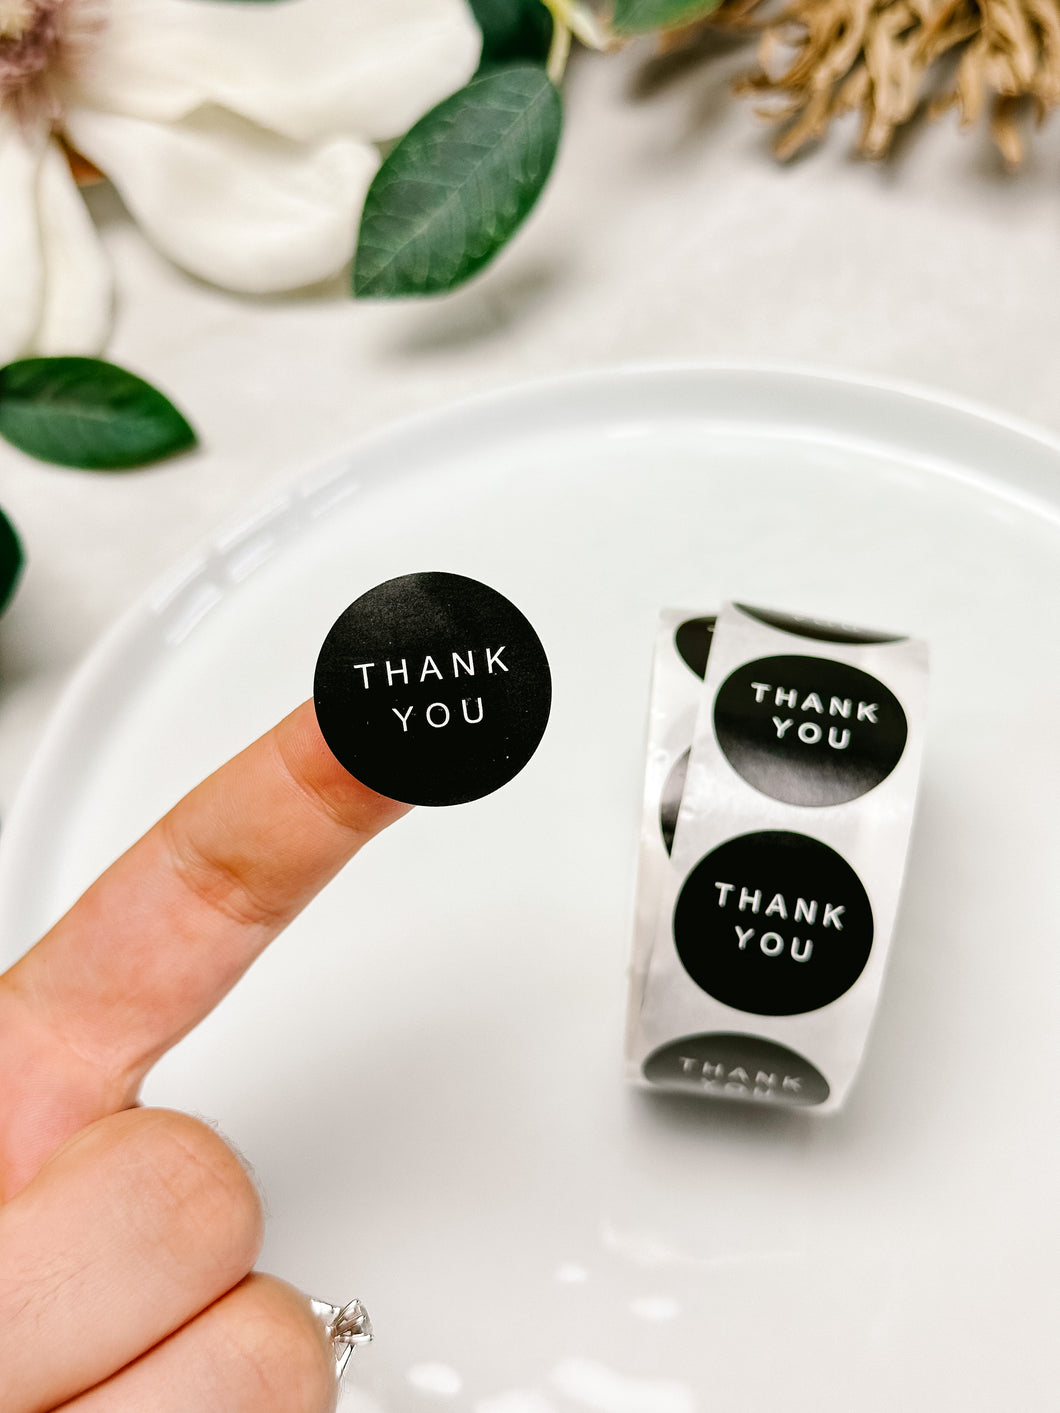 Roll of 500pcs “Thank You” Packing Stickers in Black